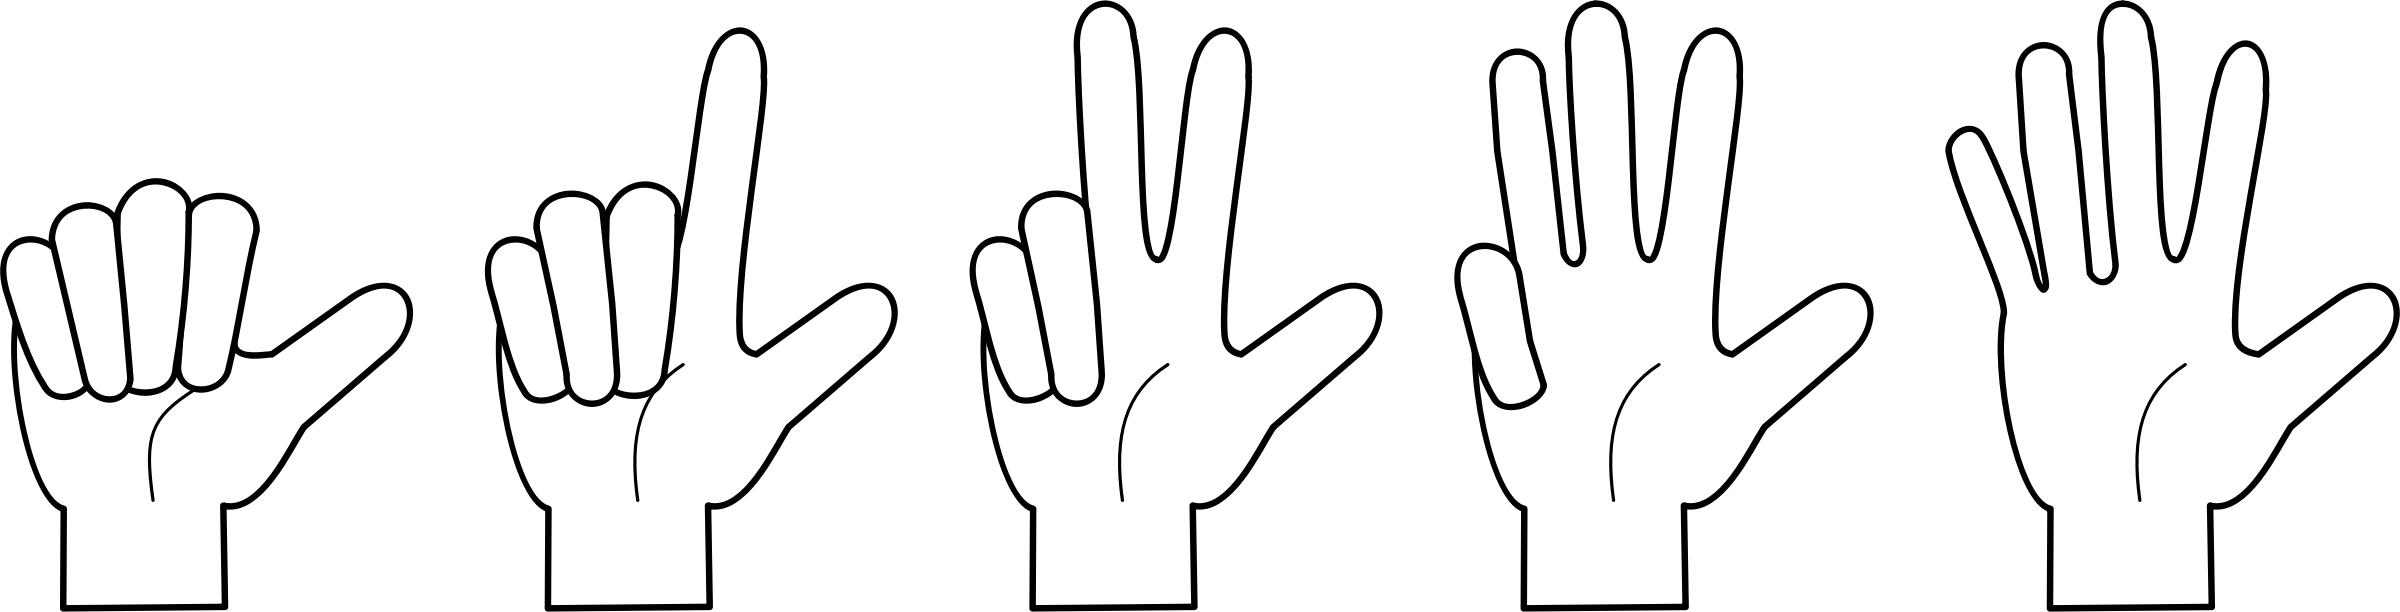 Count on fingers png